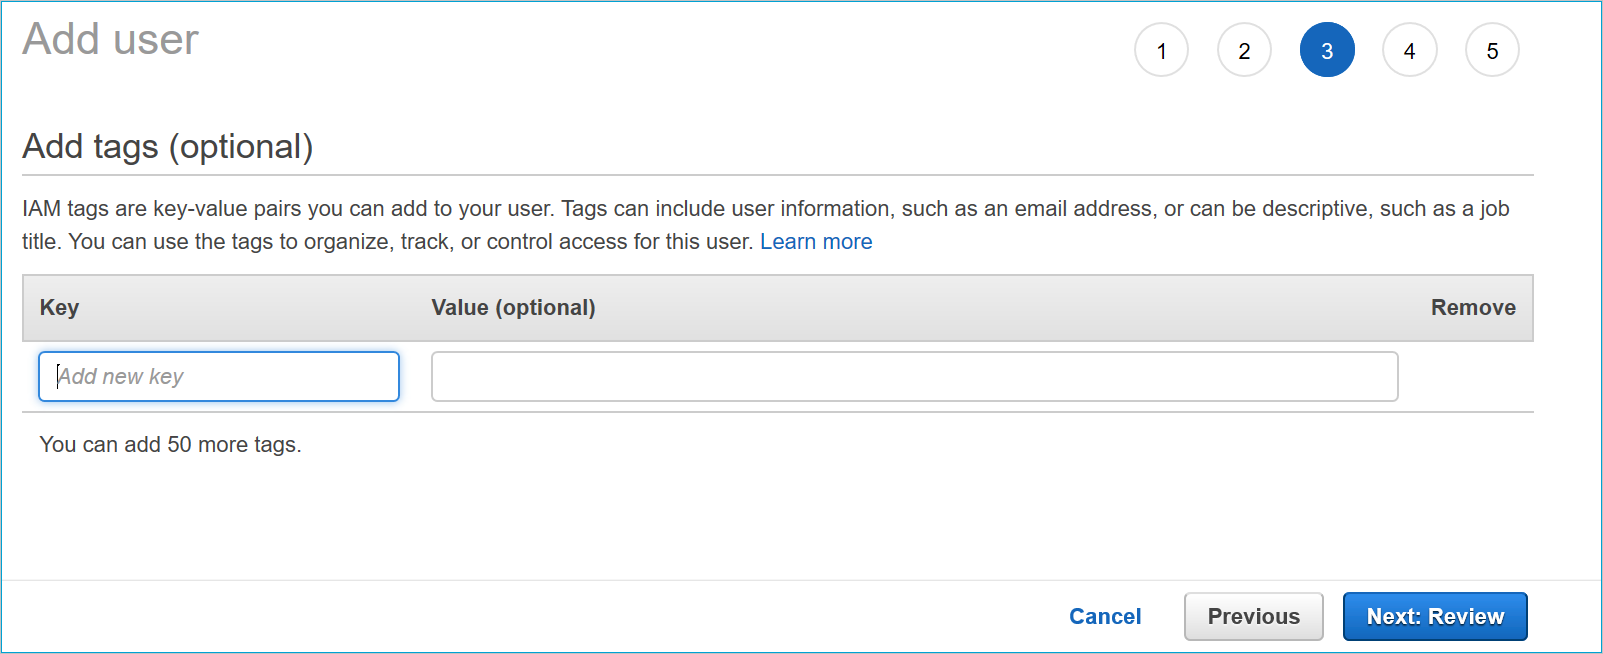 Add tags to user in AWS.